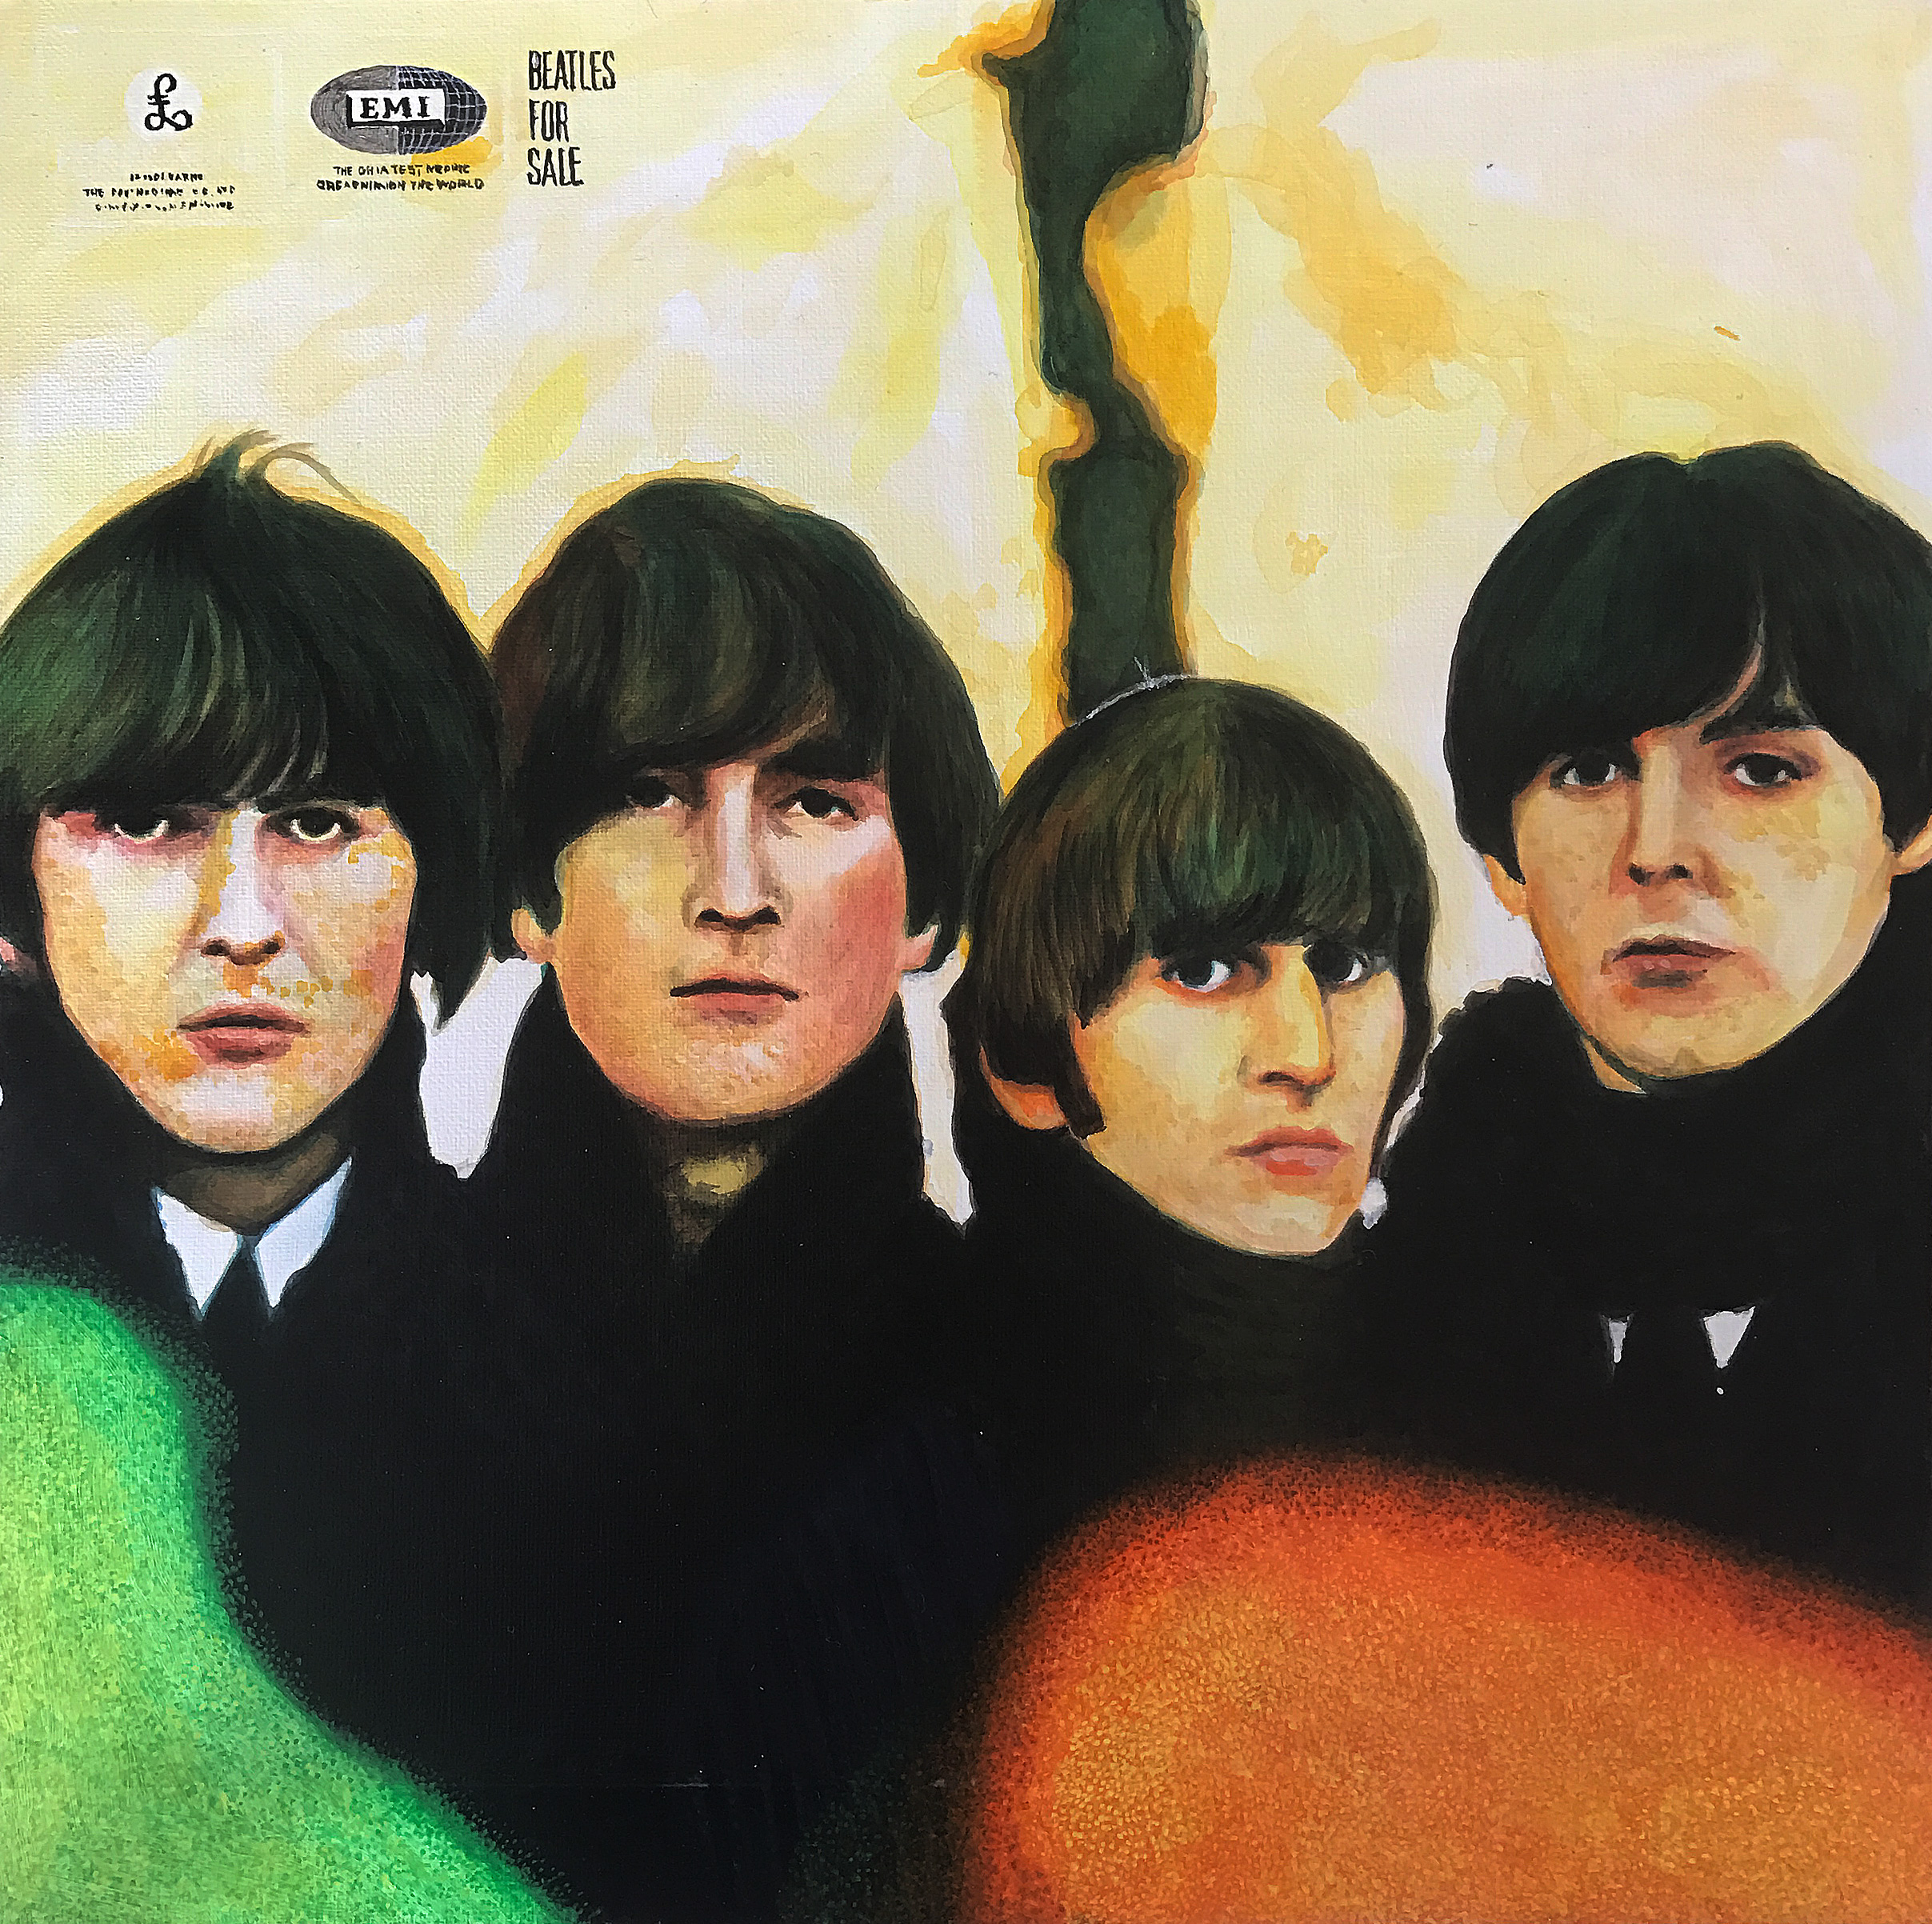 Beatles For Sale (Painting)